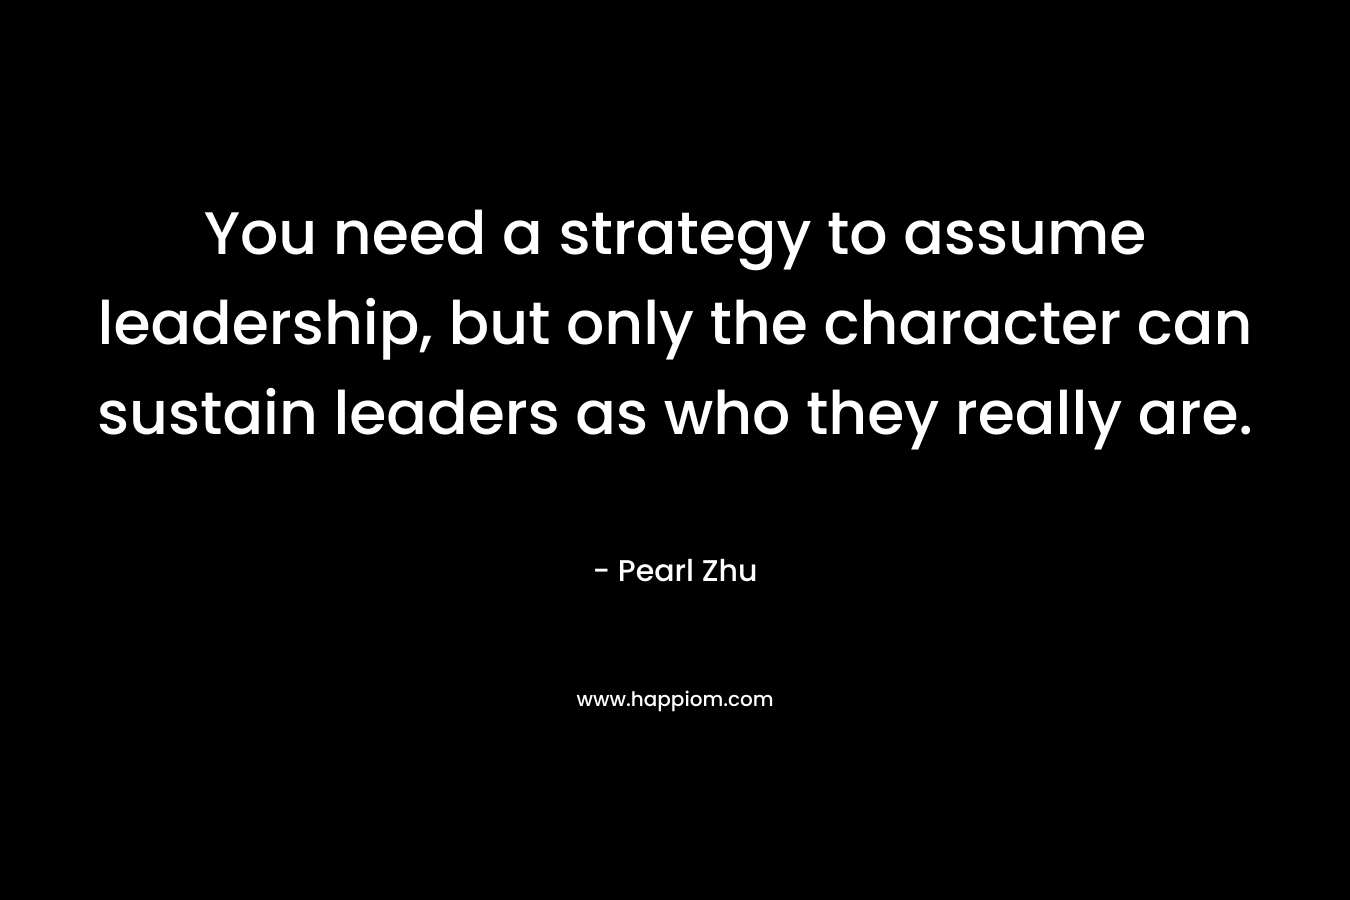 You need a strategy to assume leadership, but only the character can sustain leaders as who they really are.